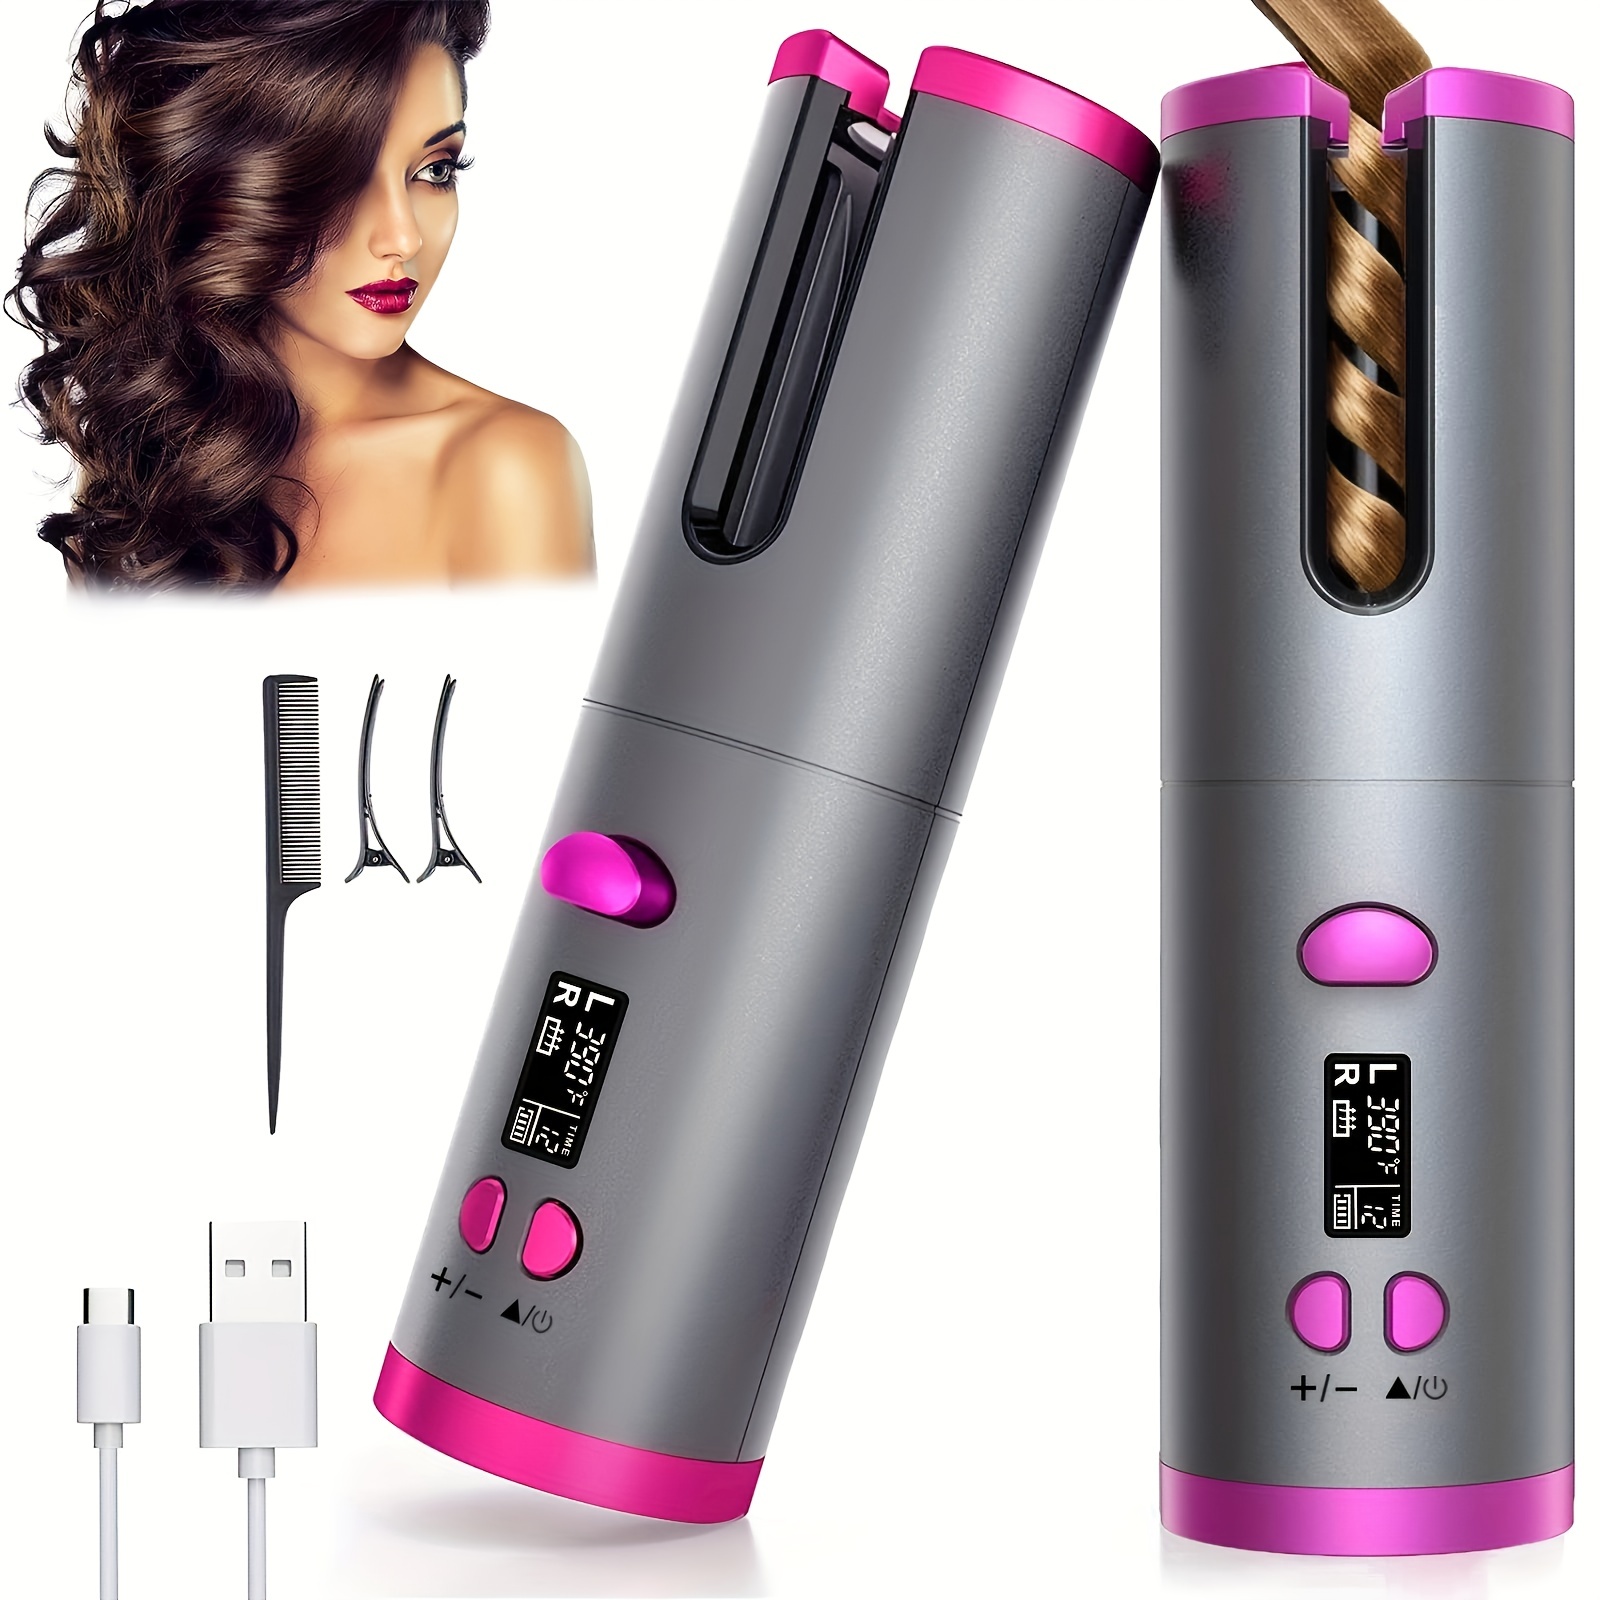 

Cordless Automatic Curling Iron, Anti-tangle Cordless Automatic Curling Iron, Portable Usb Rechargeable Rotating Curling Iron, Ceramic Barrel Swivel For Long Hair, Quick Heating For Hairstyles